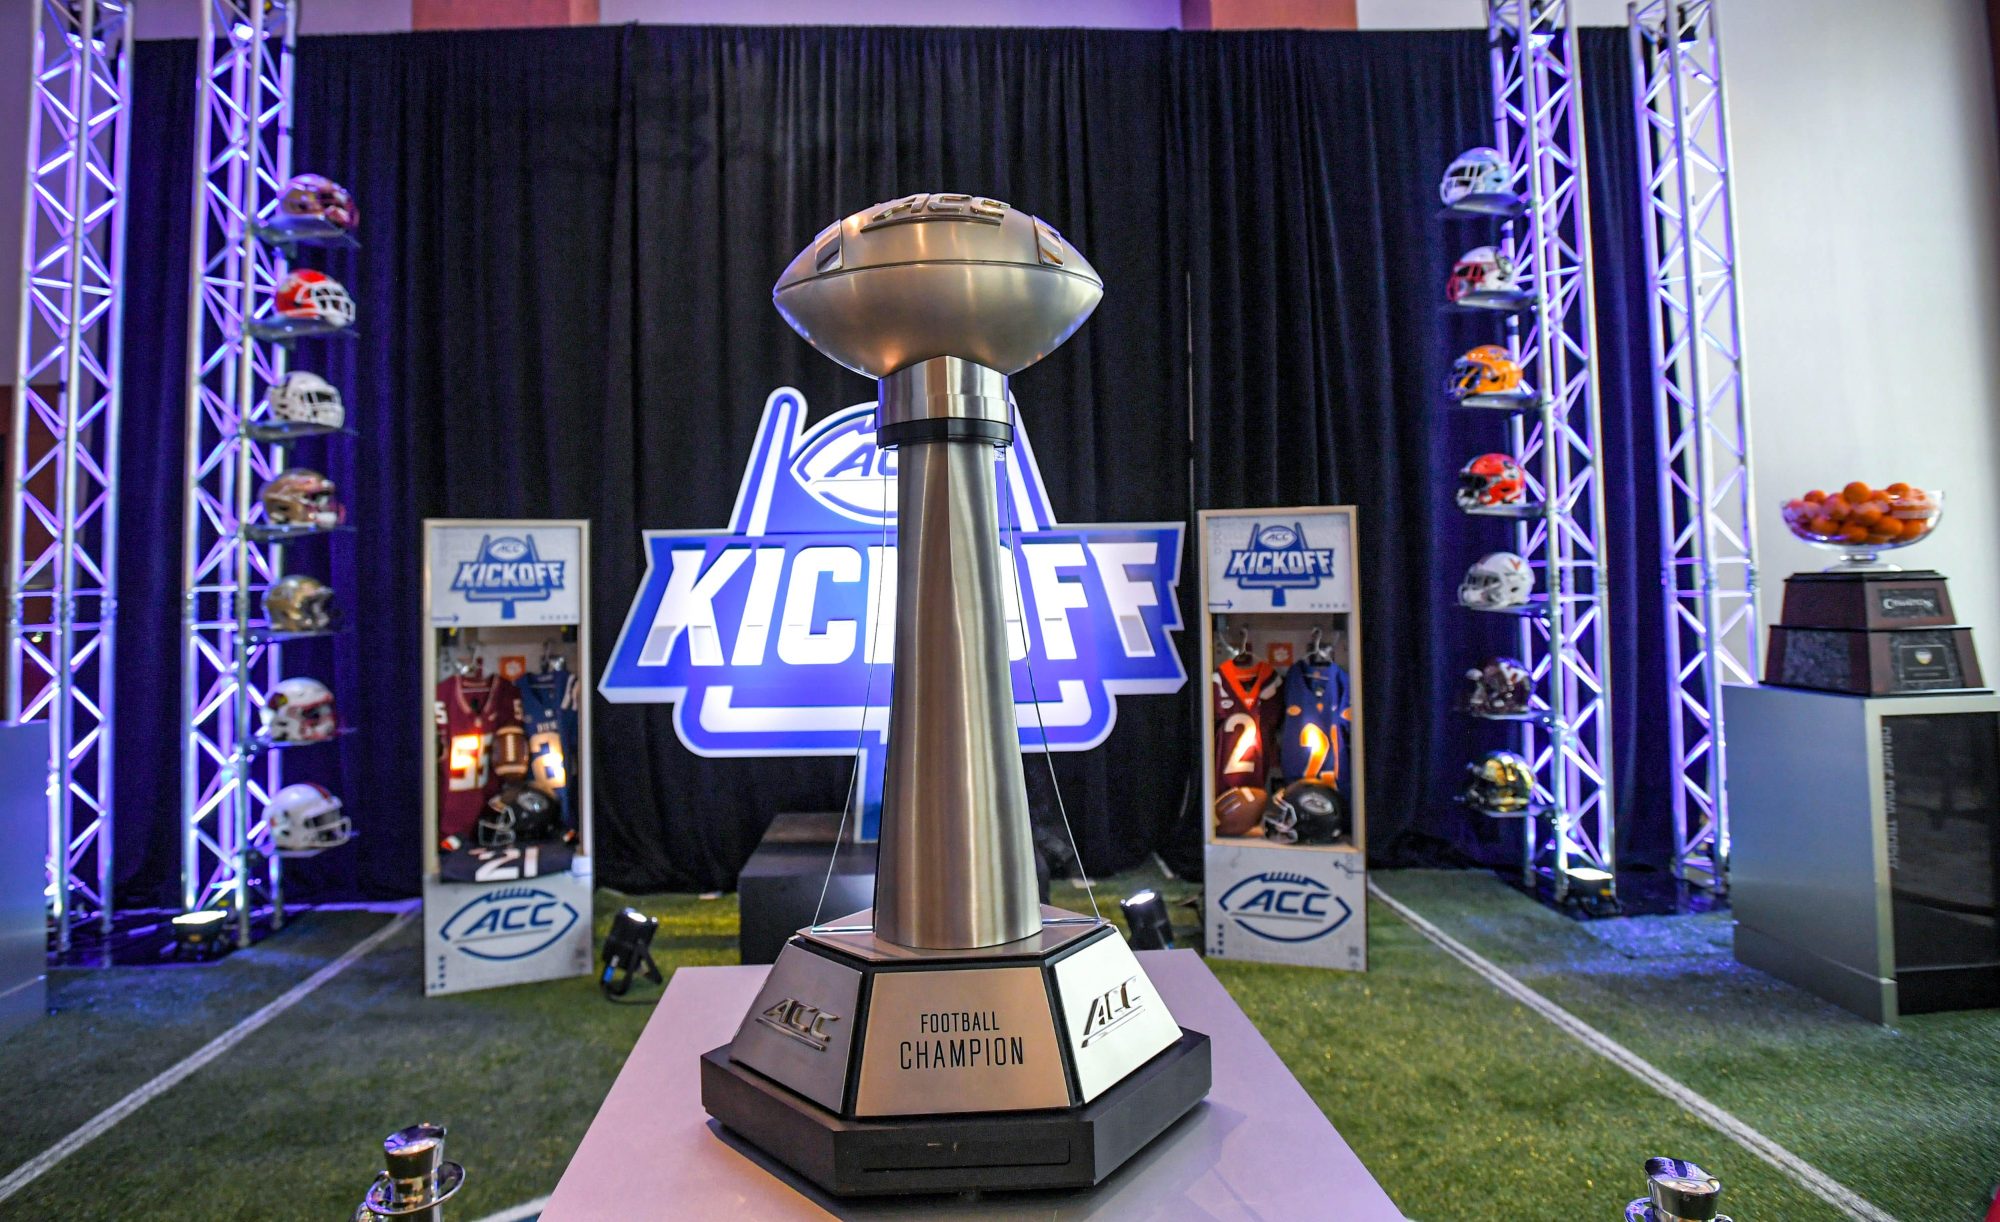 ACC Champion trophy on display during the ACC Kickoff Media Days event in downtown Charlotte, N.C. Wednesday, July 26, 2023.